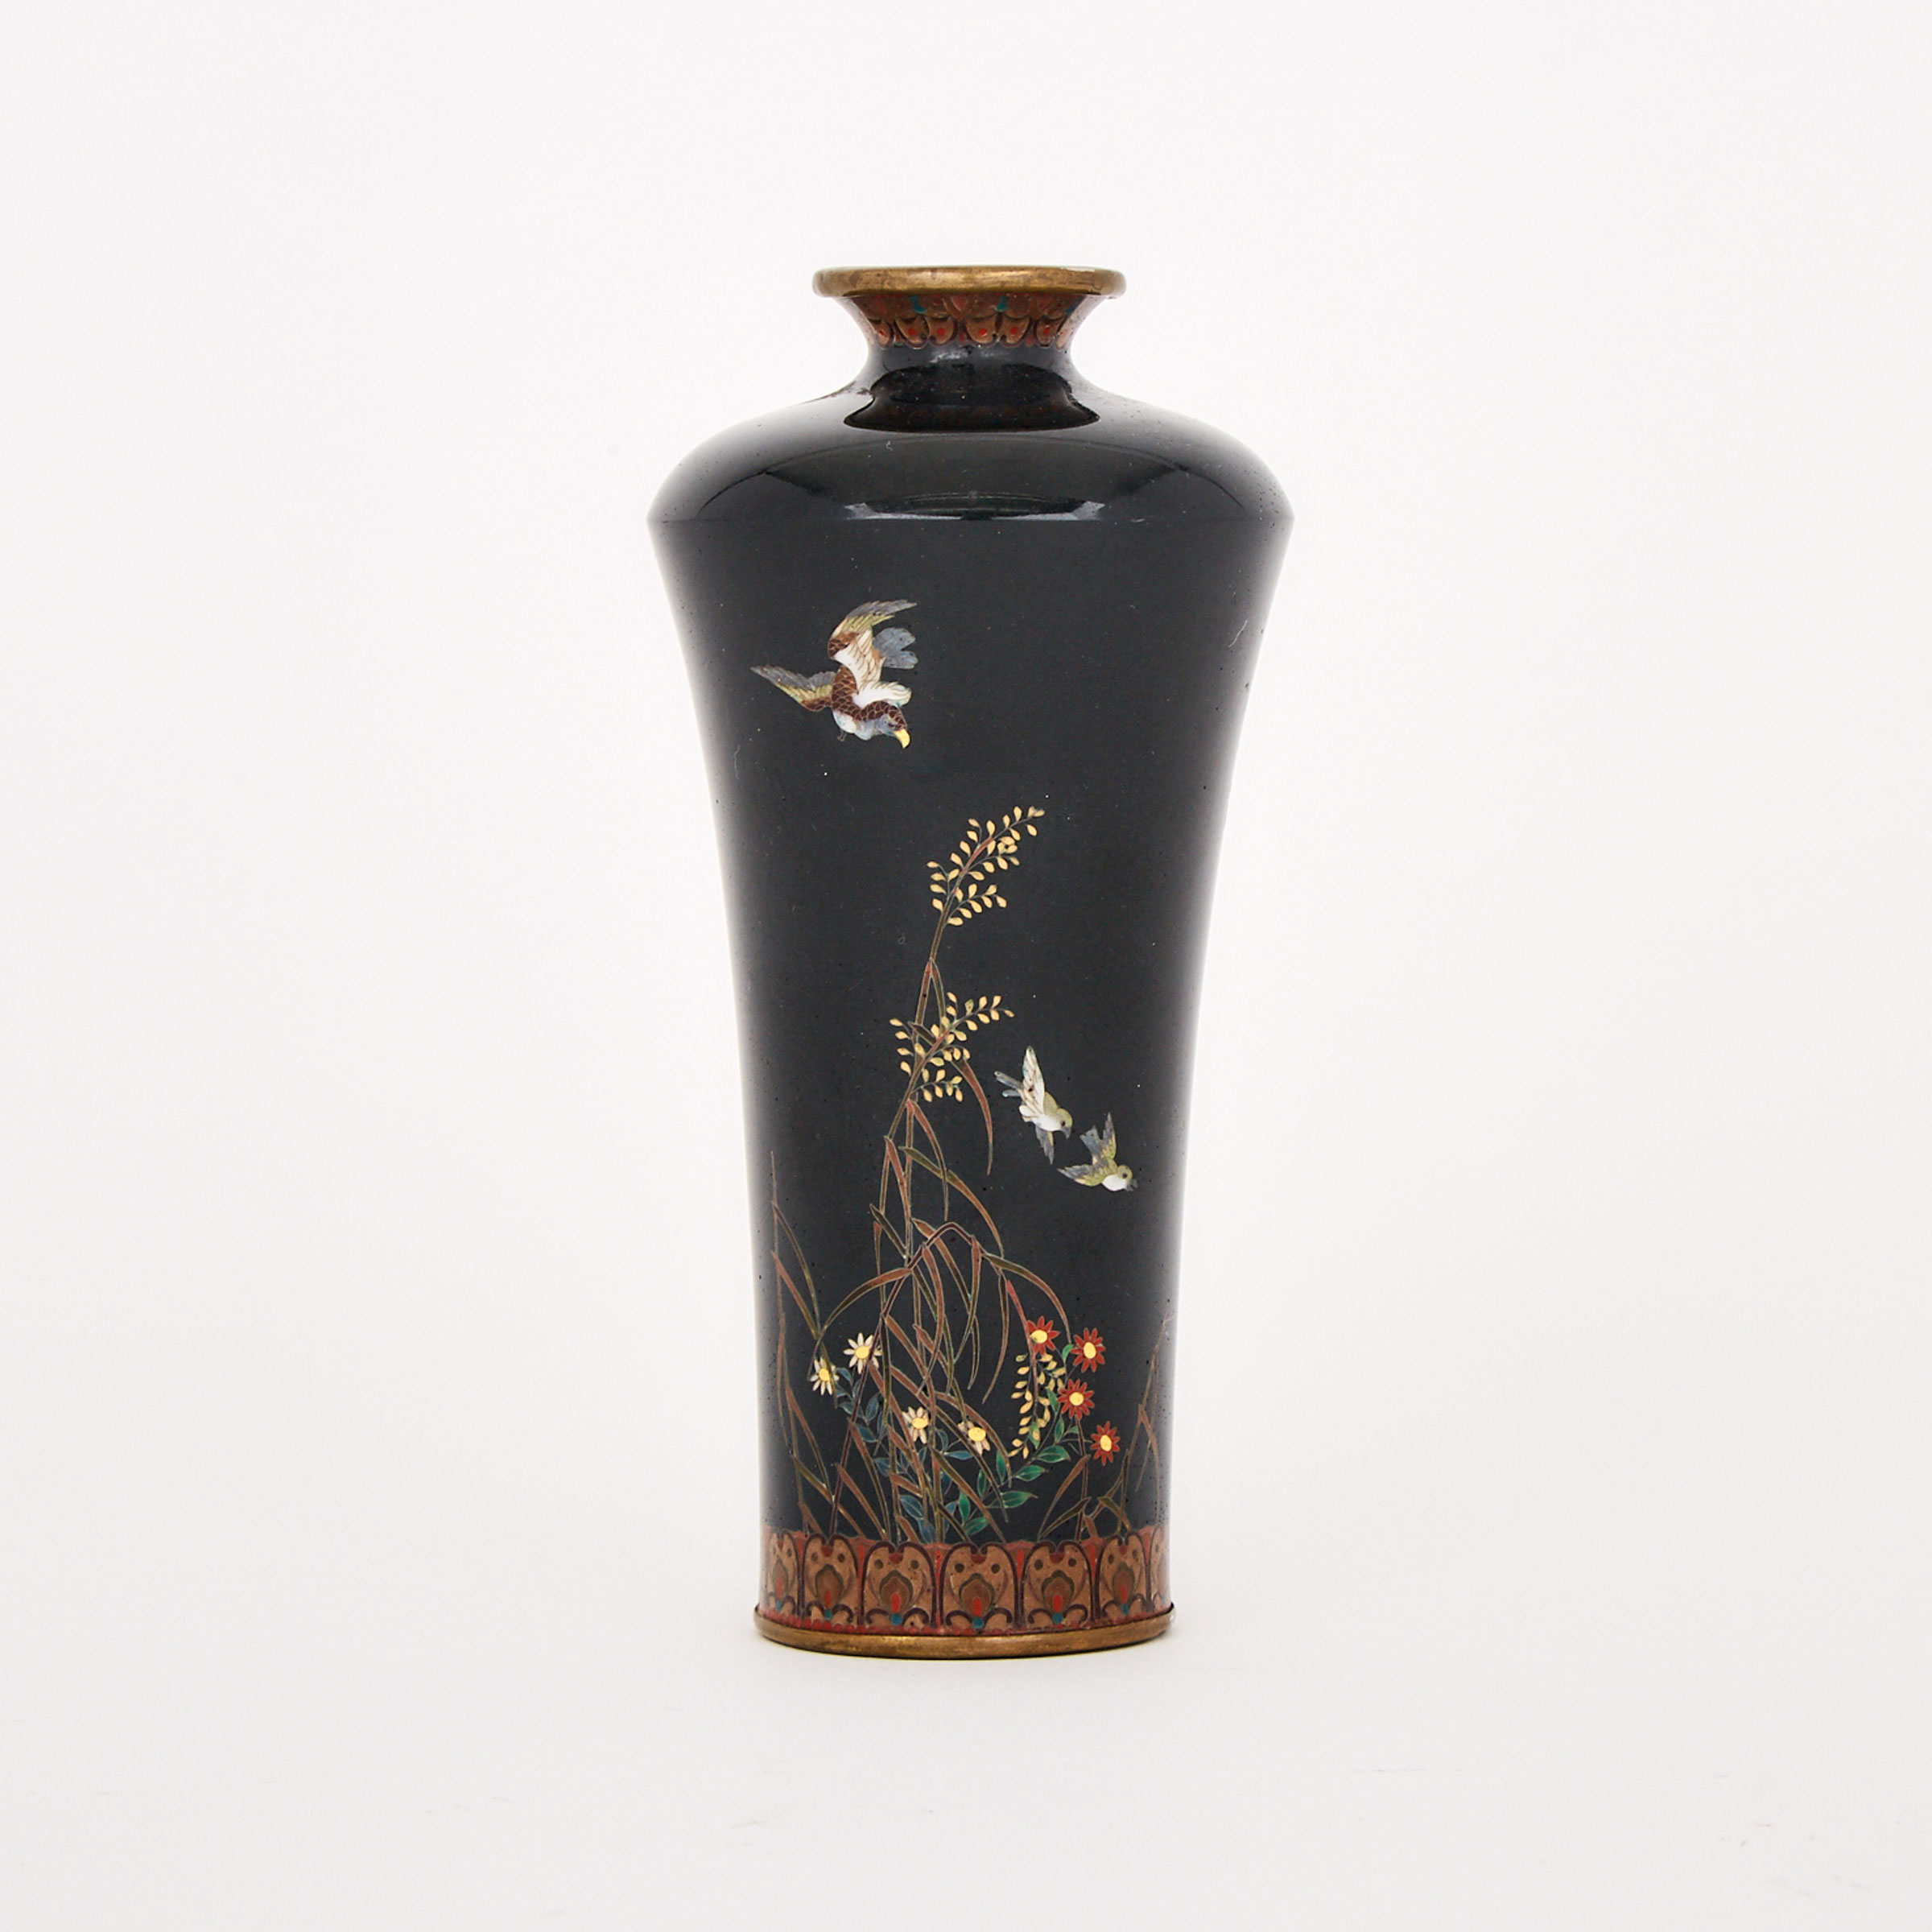 A  Small Japanese Cloisonne Vase, Meiji Period